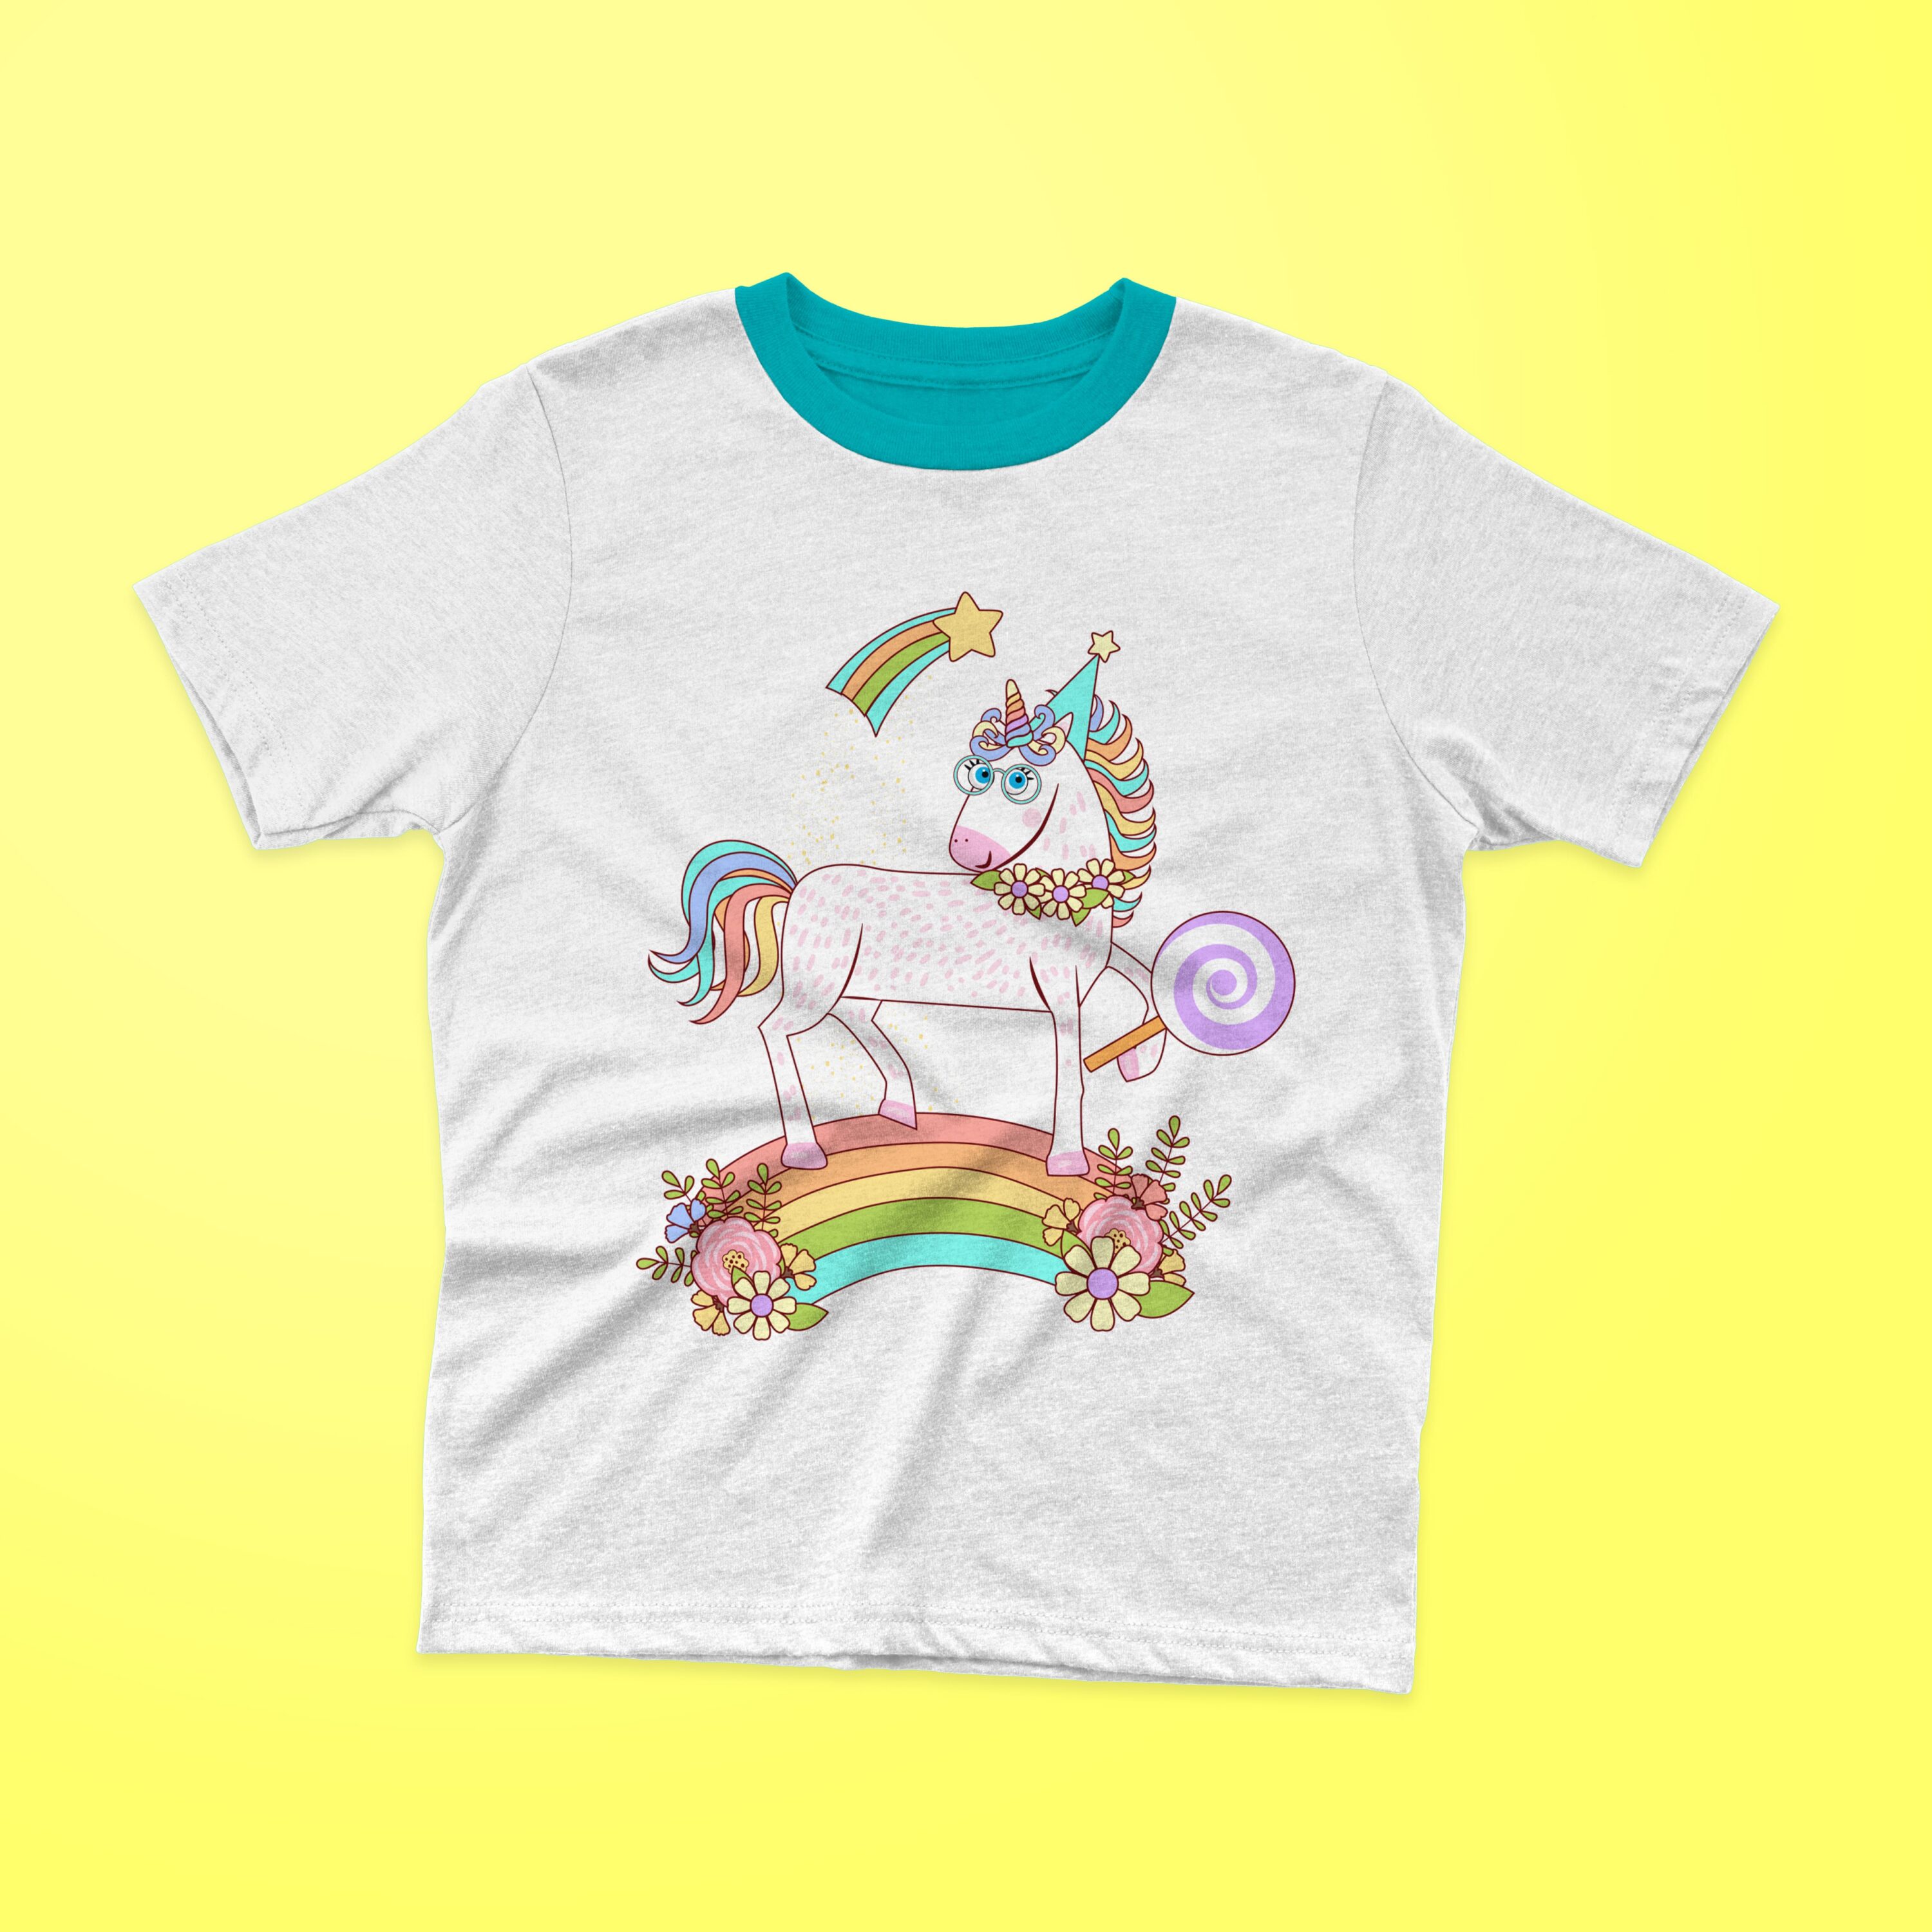 White t-shirt with a turquoise collar and a colorful unicorn with a rainbow on a yellow background.